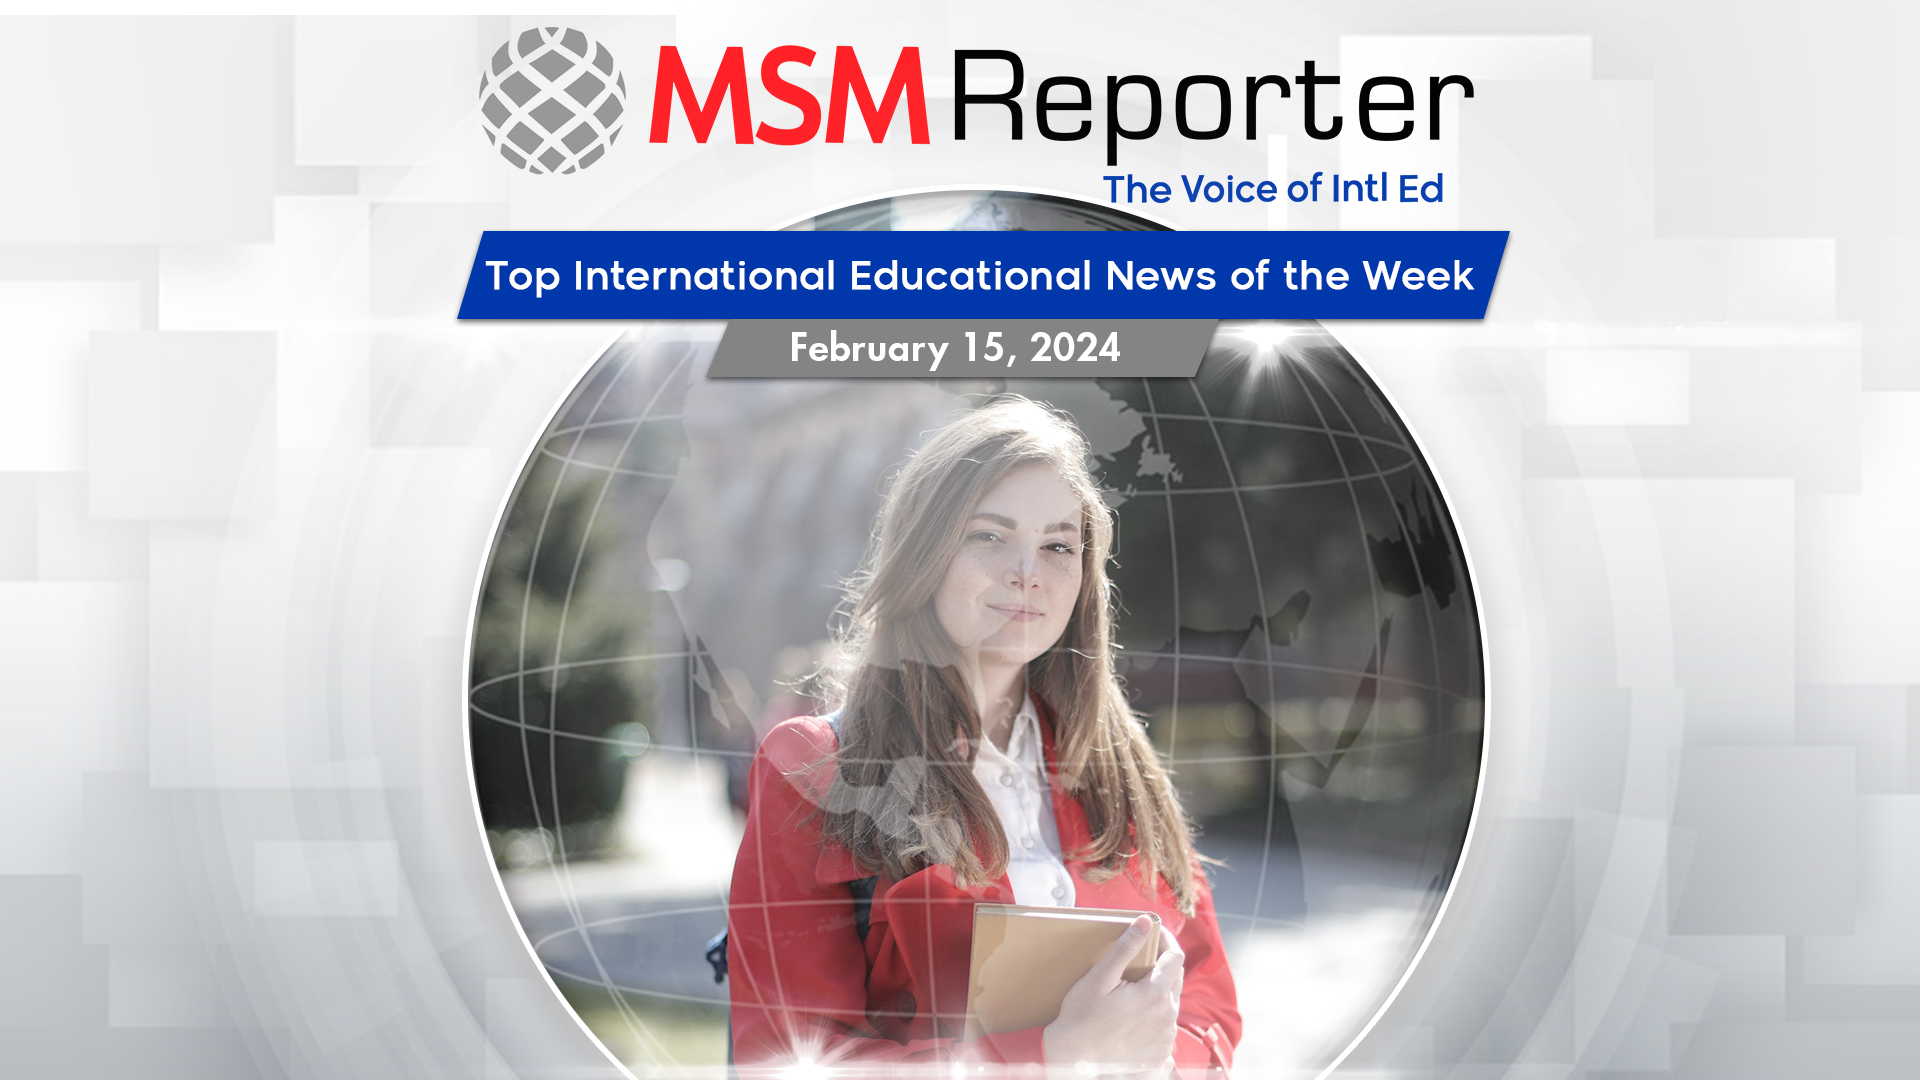 Looming end of post-COVID boom of int’l students in UK, influx of Indian students to US, and more in this week’s MSM Reporter